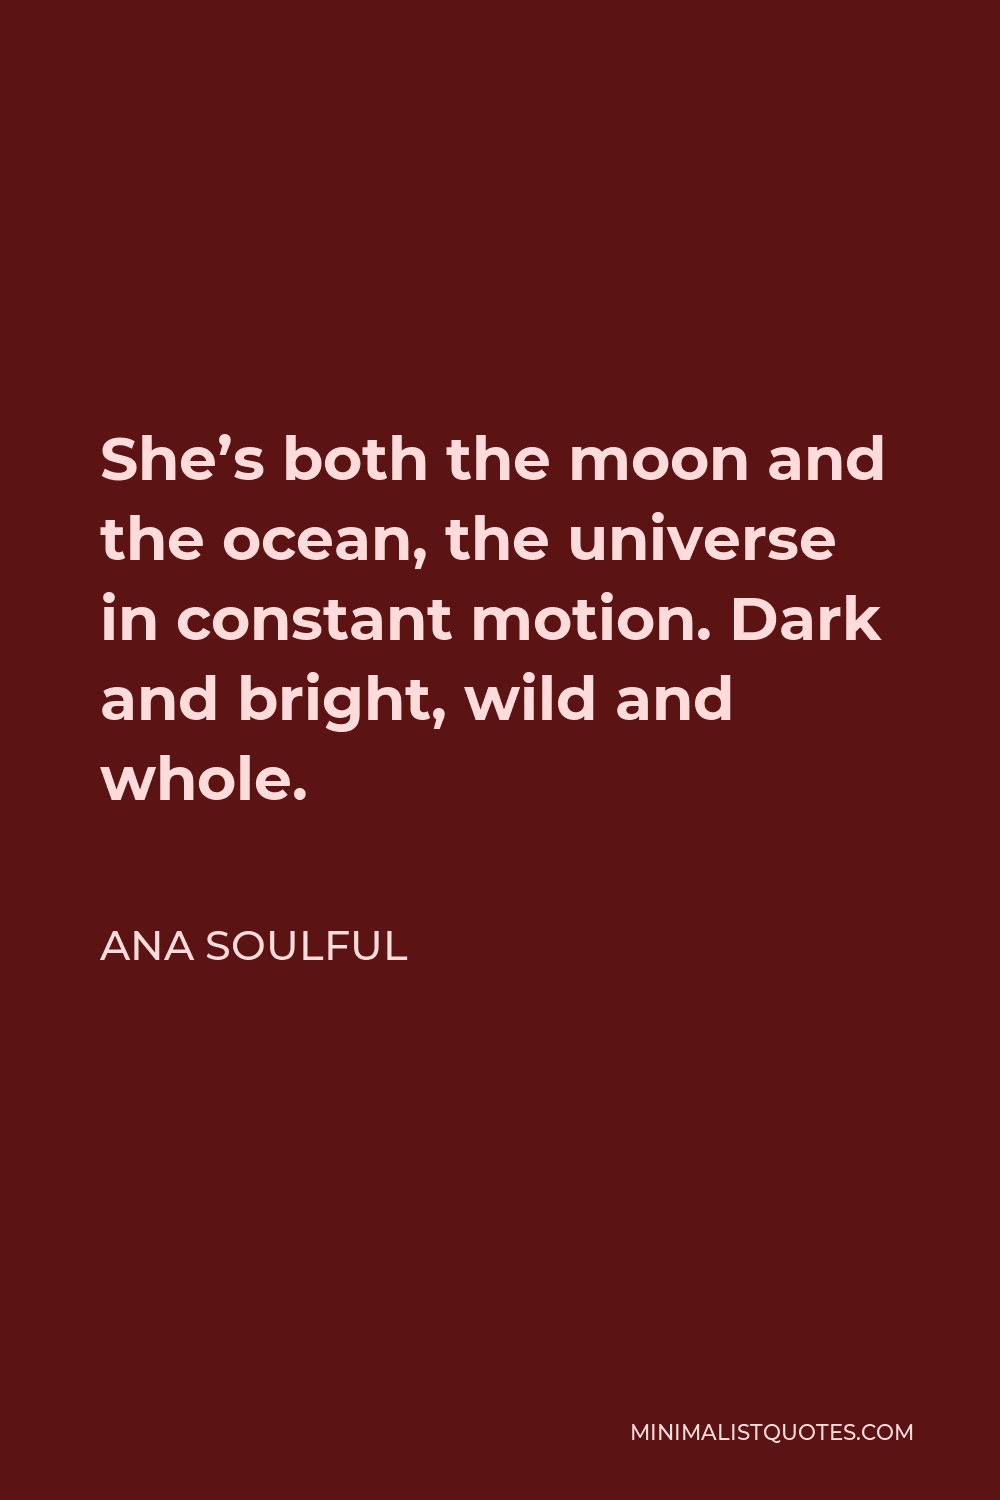 Ana Soulful Quote - She’s both the moon and the ocean, the universe in constant motion. Dark and bright, wild and whole.